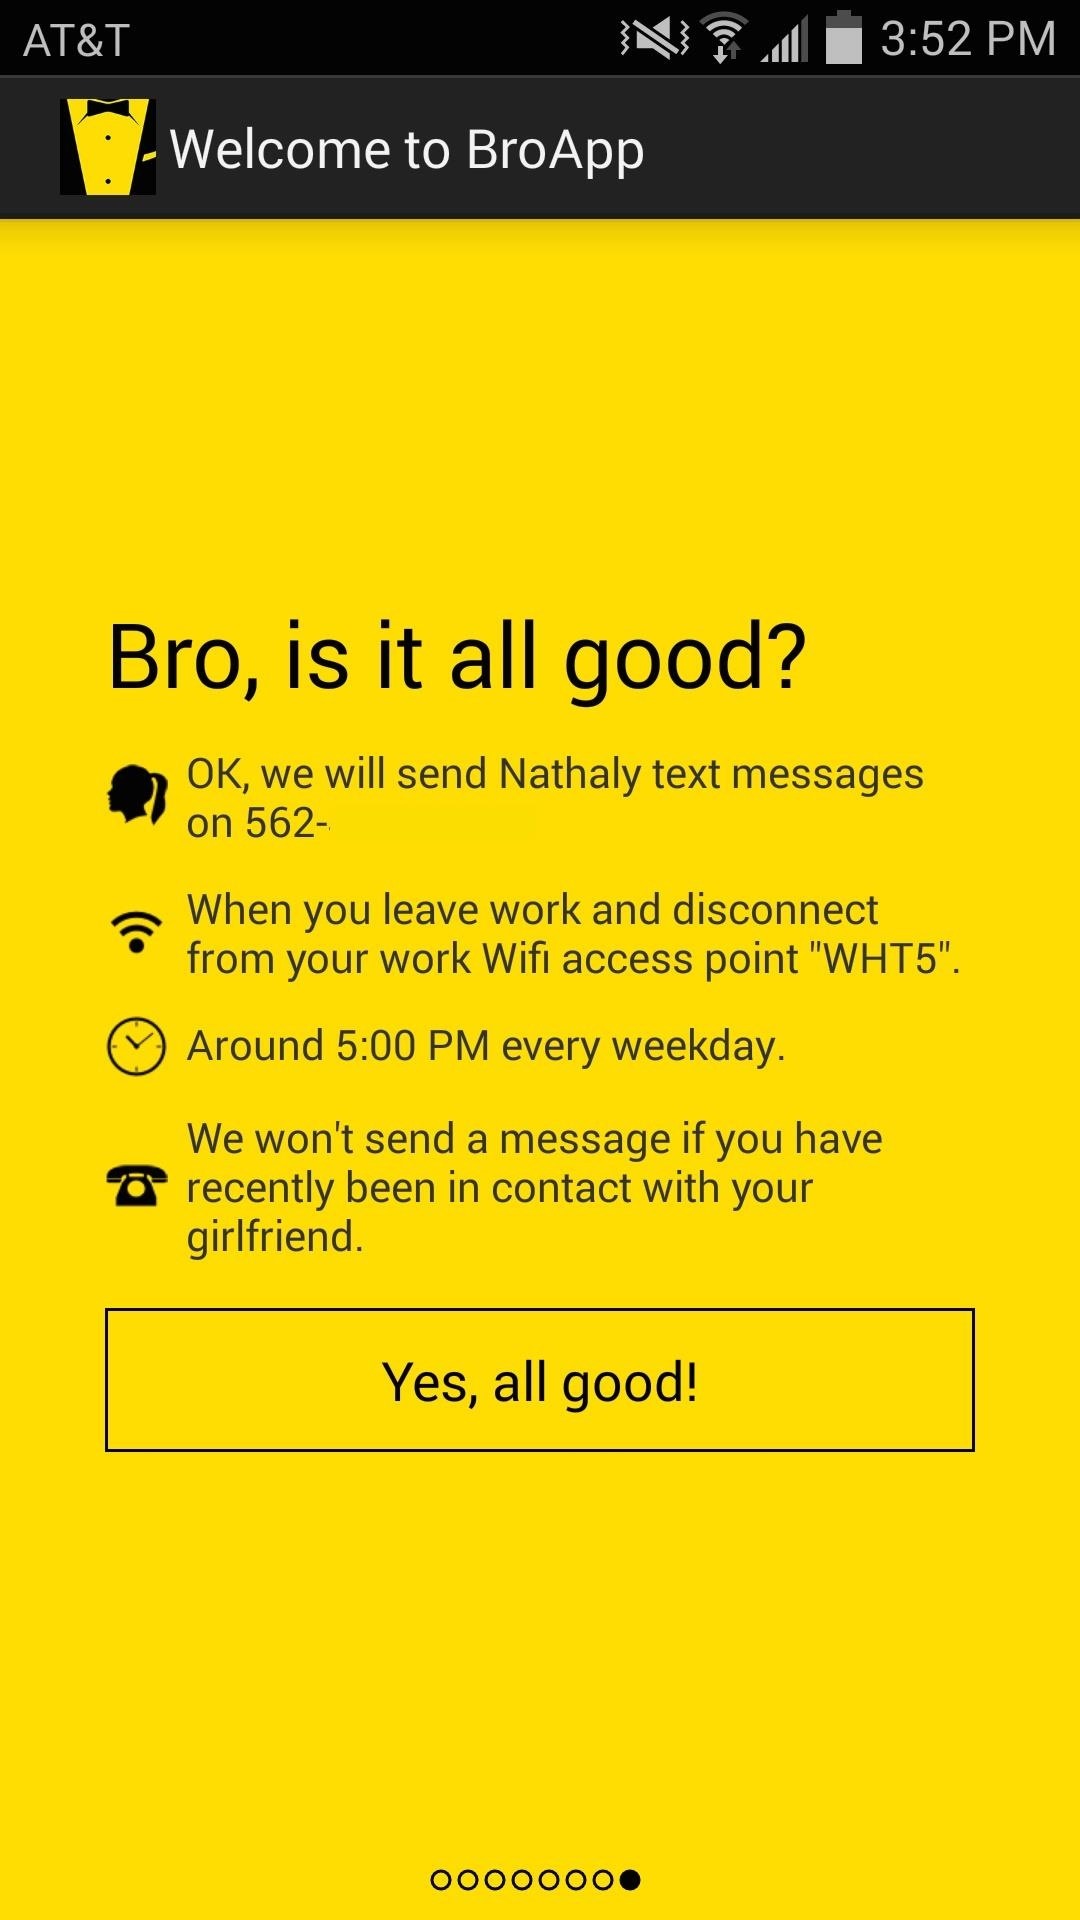 Get More Bro Time by Automating Loving Texts to Your Girlfriend